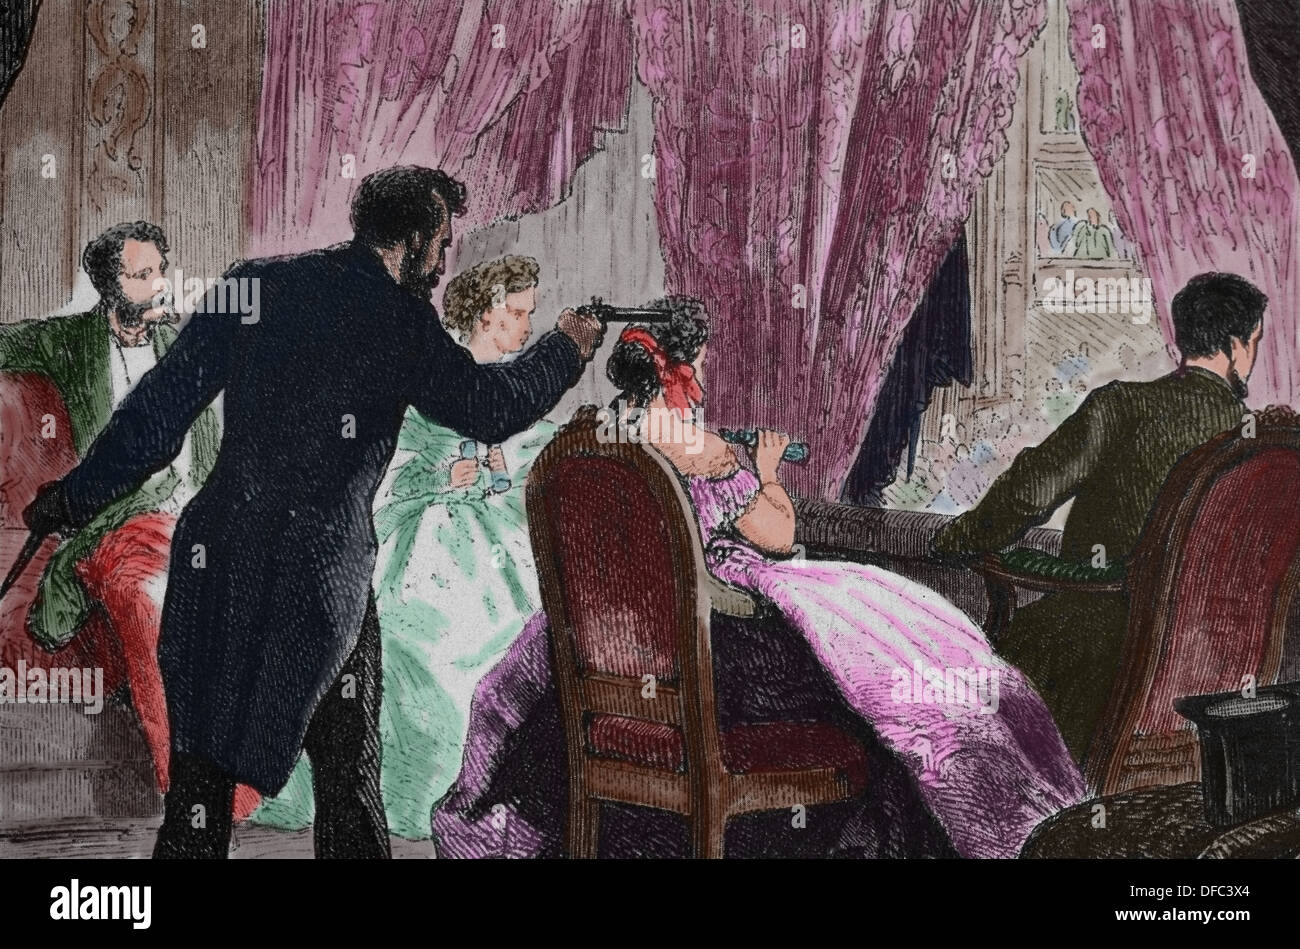 The Assassination of President Lincoln. Colored engraving. Ford's Theatre, April 14, 1865. Stock Photo